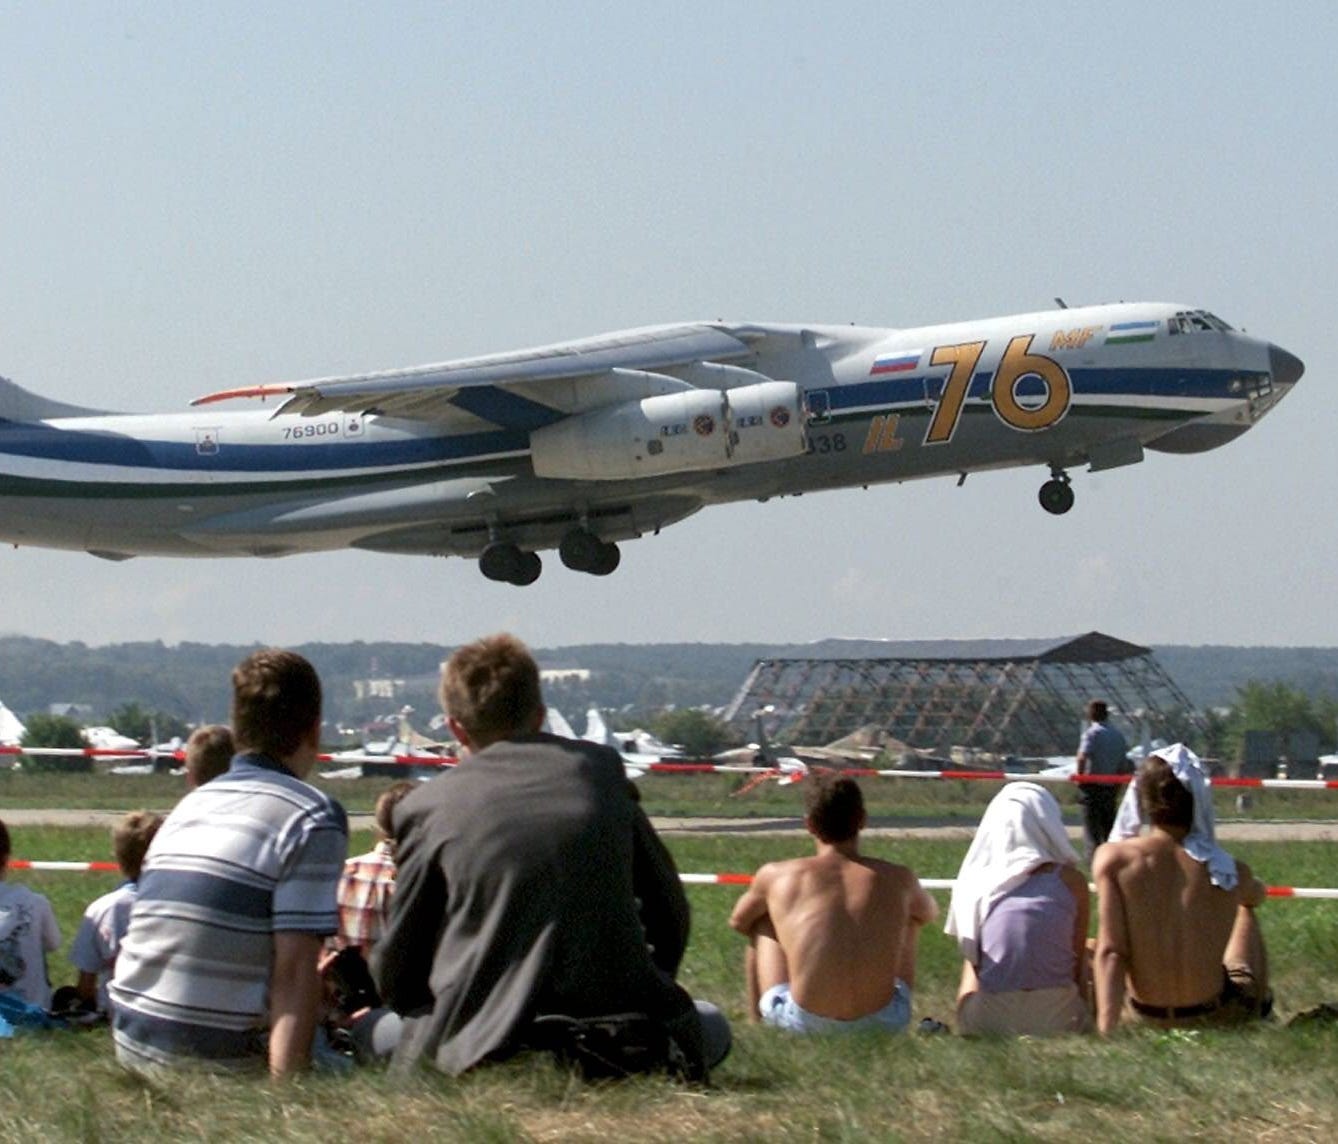 A file picture dated Aug. 17, 2001 showing a Russian cargo plane Ilyushin-76 during a demonstrating flight at Moscow's International airshow, Moscow, Russia. Media reports on April 11, 2018 state an Algerian Il-76 military transport plane crashed soo